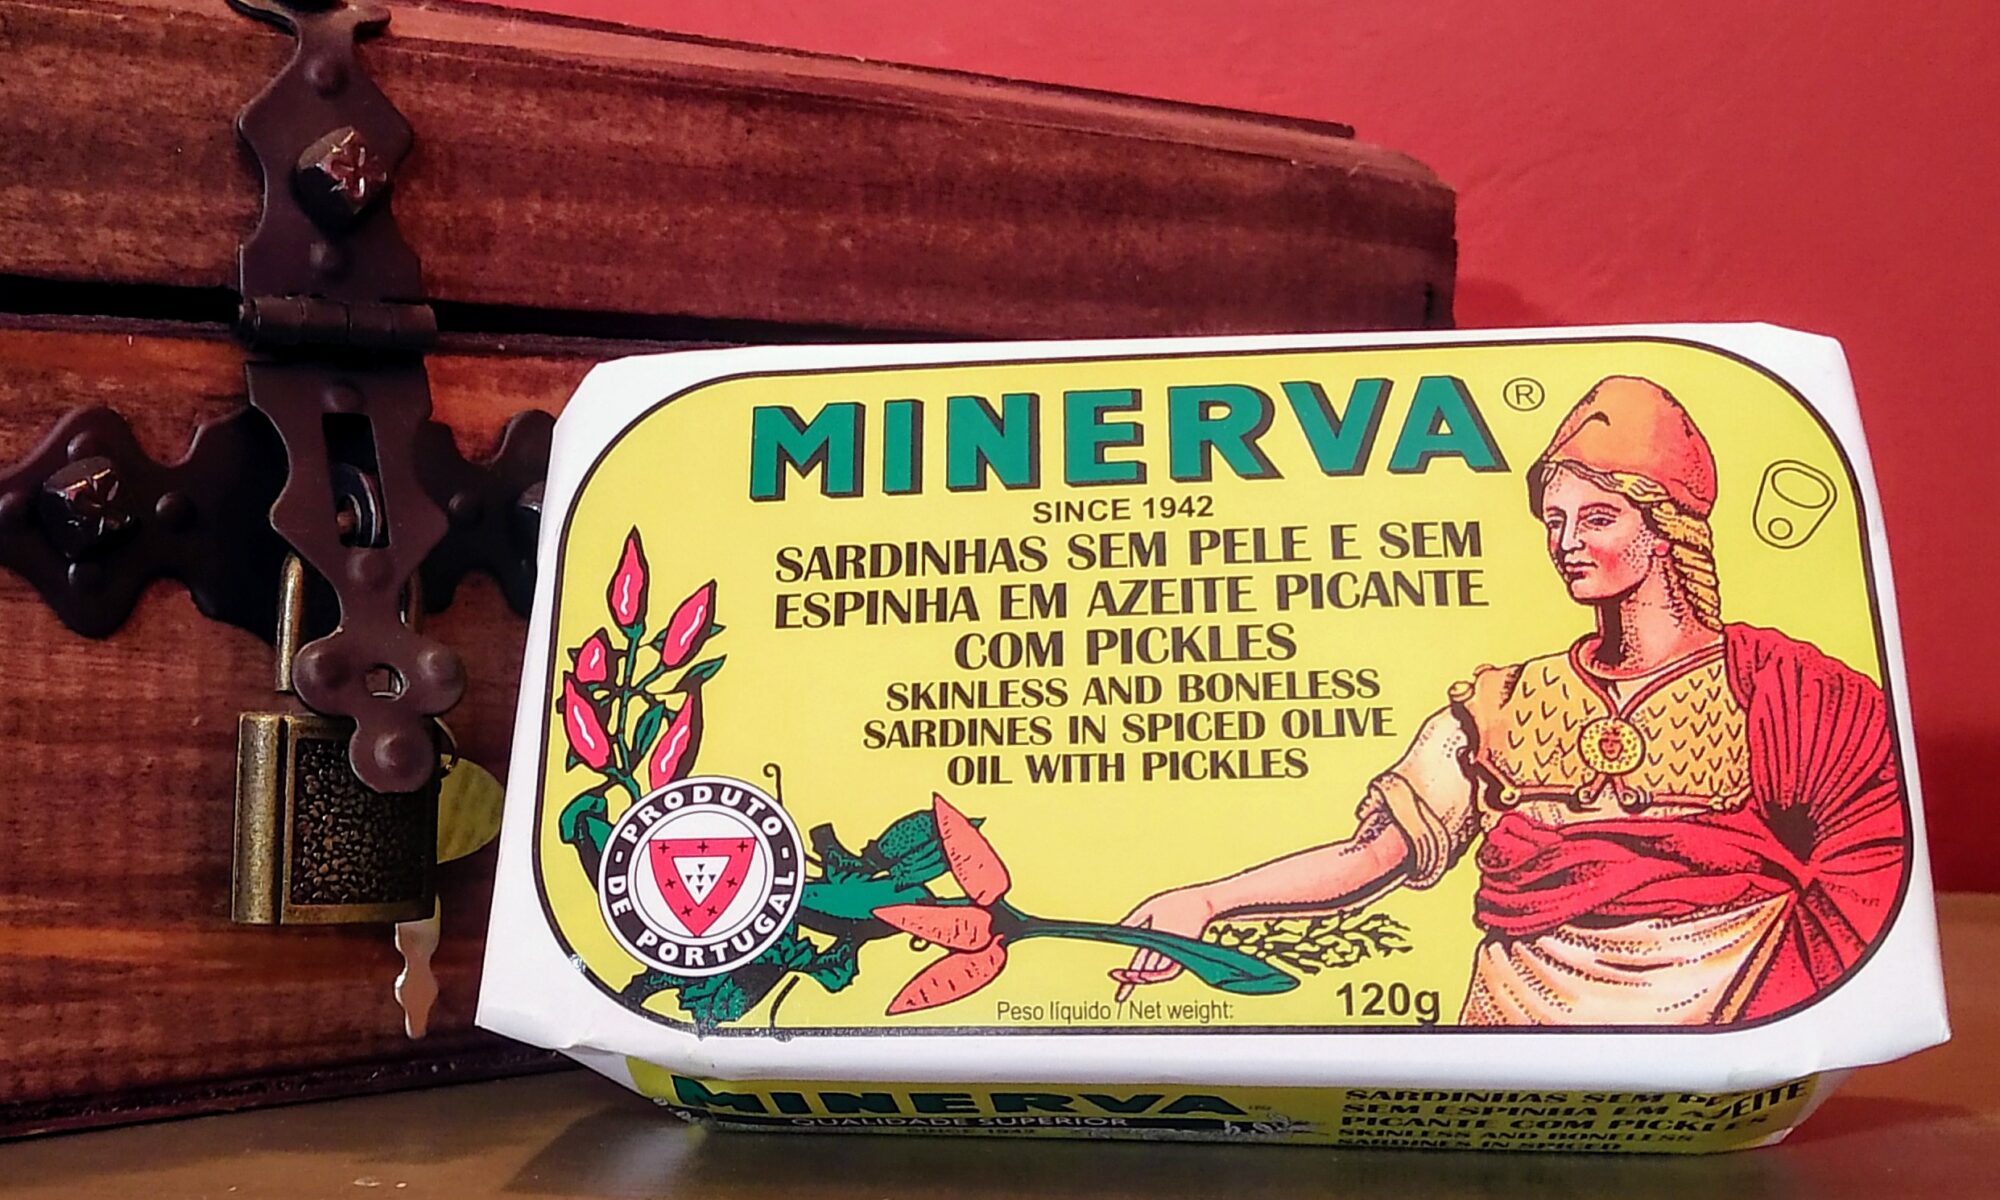 Image of the front of the packaging for Minerva Skinless and Boneless Sardines in Spiced Olive Oil with Pickles